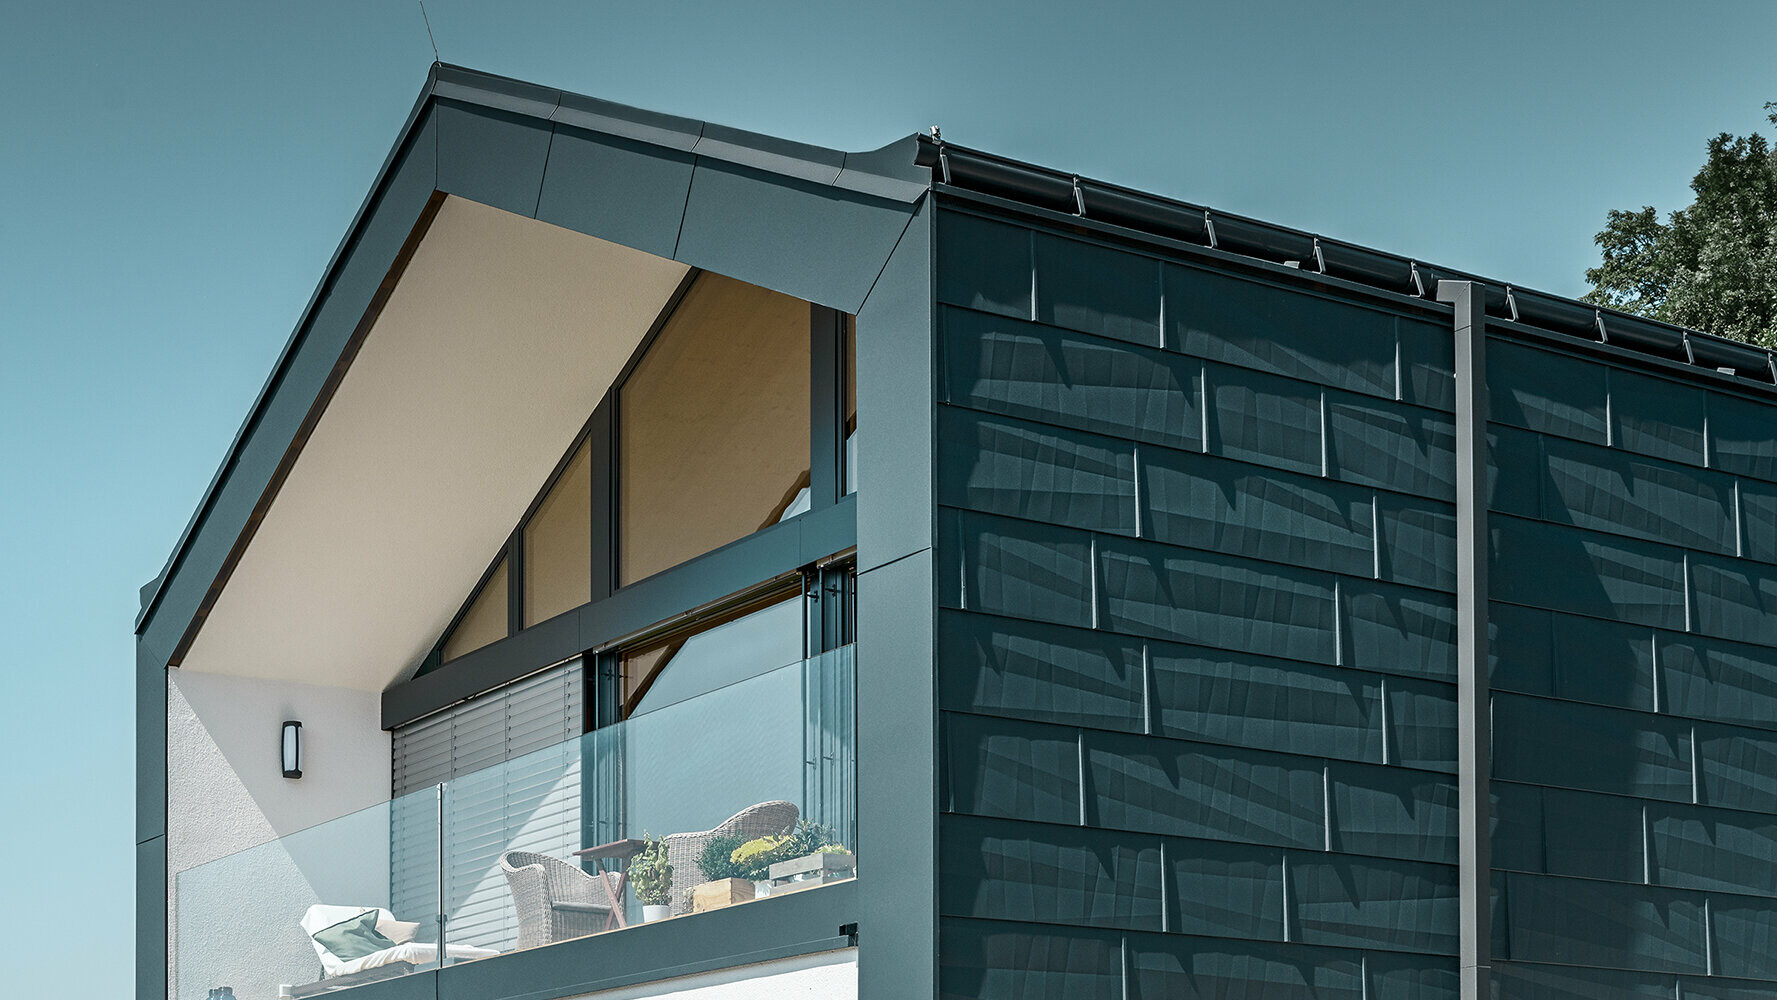 Upper part of the building is clad with the aluminium panels, FX.12, in anthracite from PREFA, the downpipe is square, and the PREFA square downpipe is also in anthracite